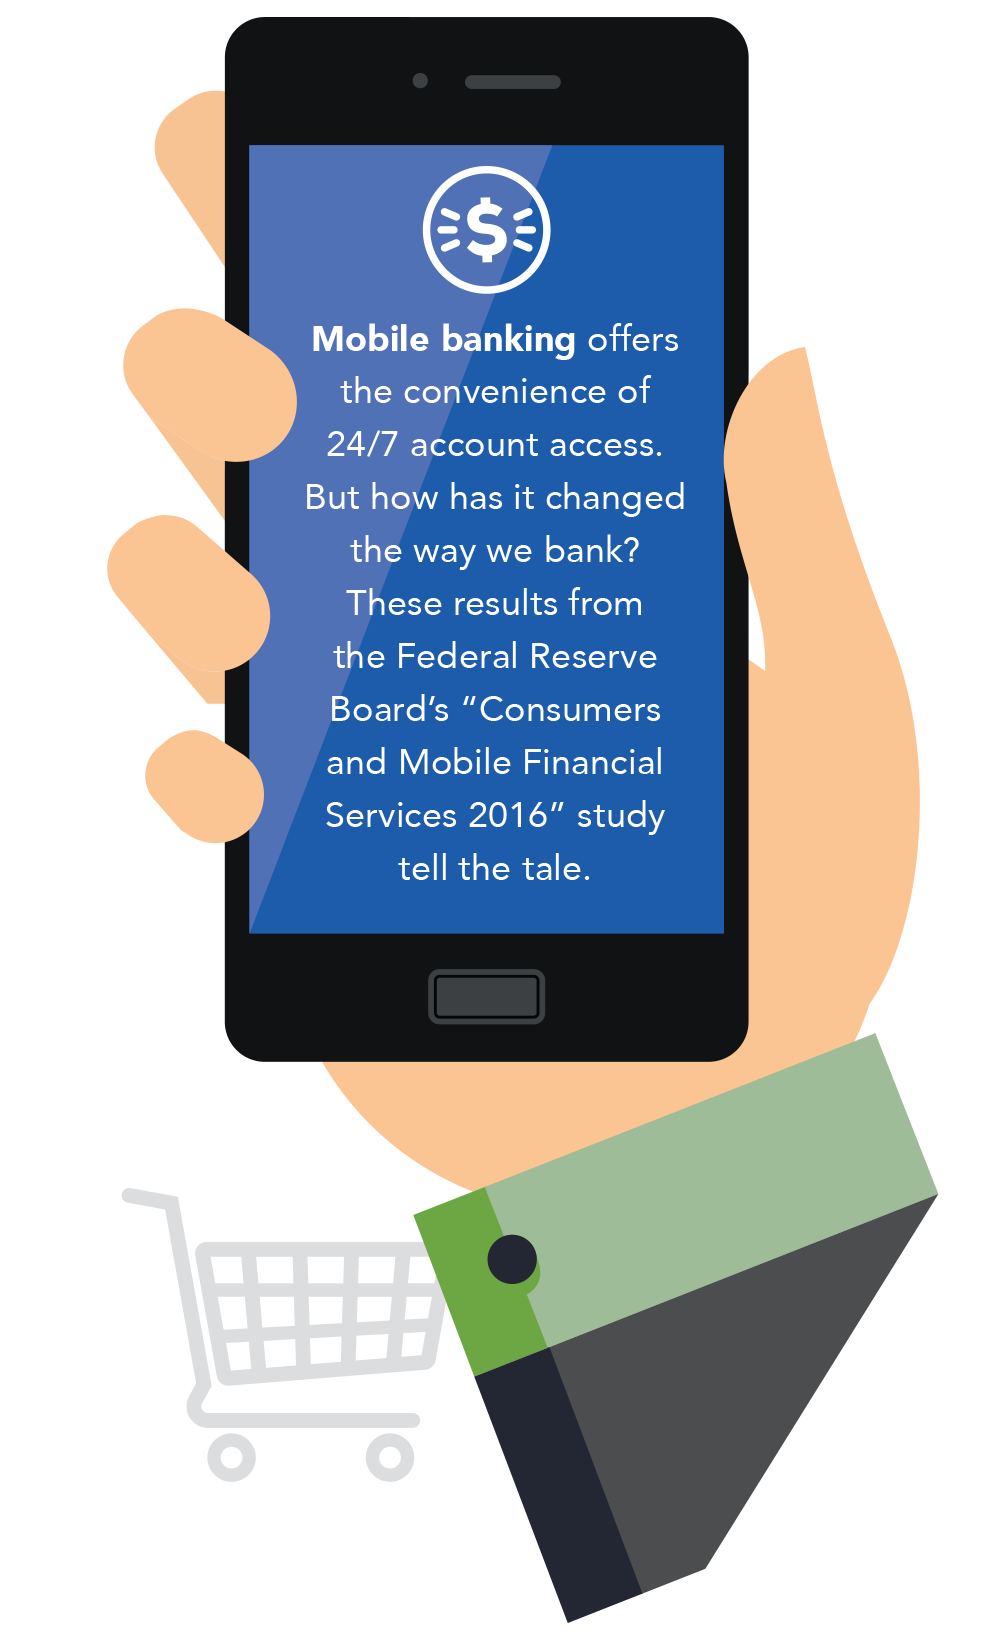 Hand holding phone that says: Mobile banking offers the convenience of 24/7 account access. But how has it changed the way we bank? These results from the Federal Reserve Board's Consumers and Mobile Financial Services 2016 study tell the tale.